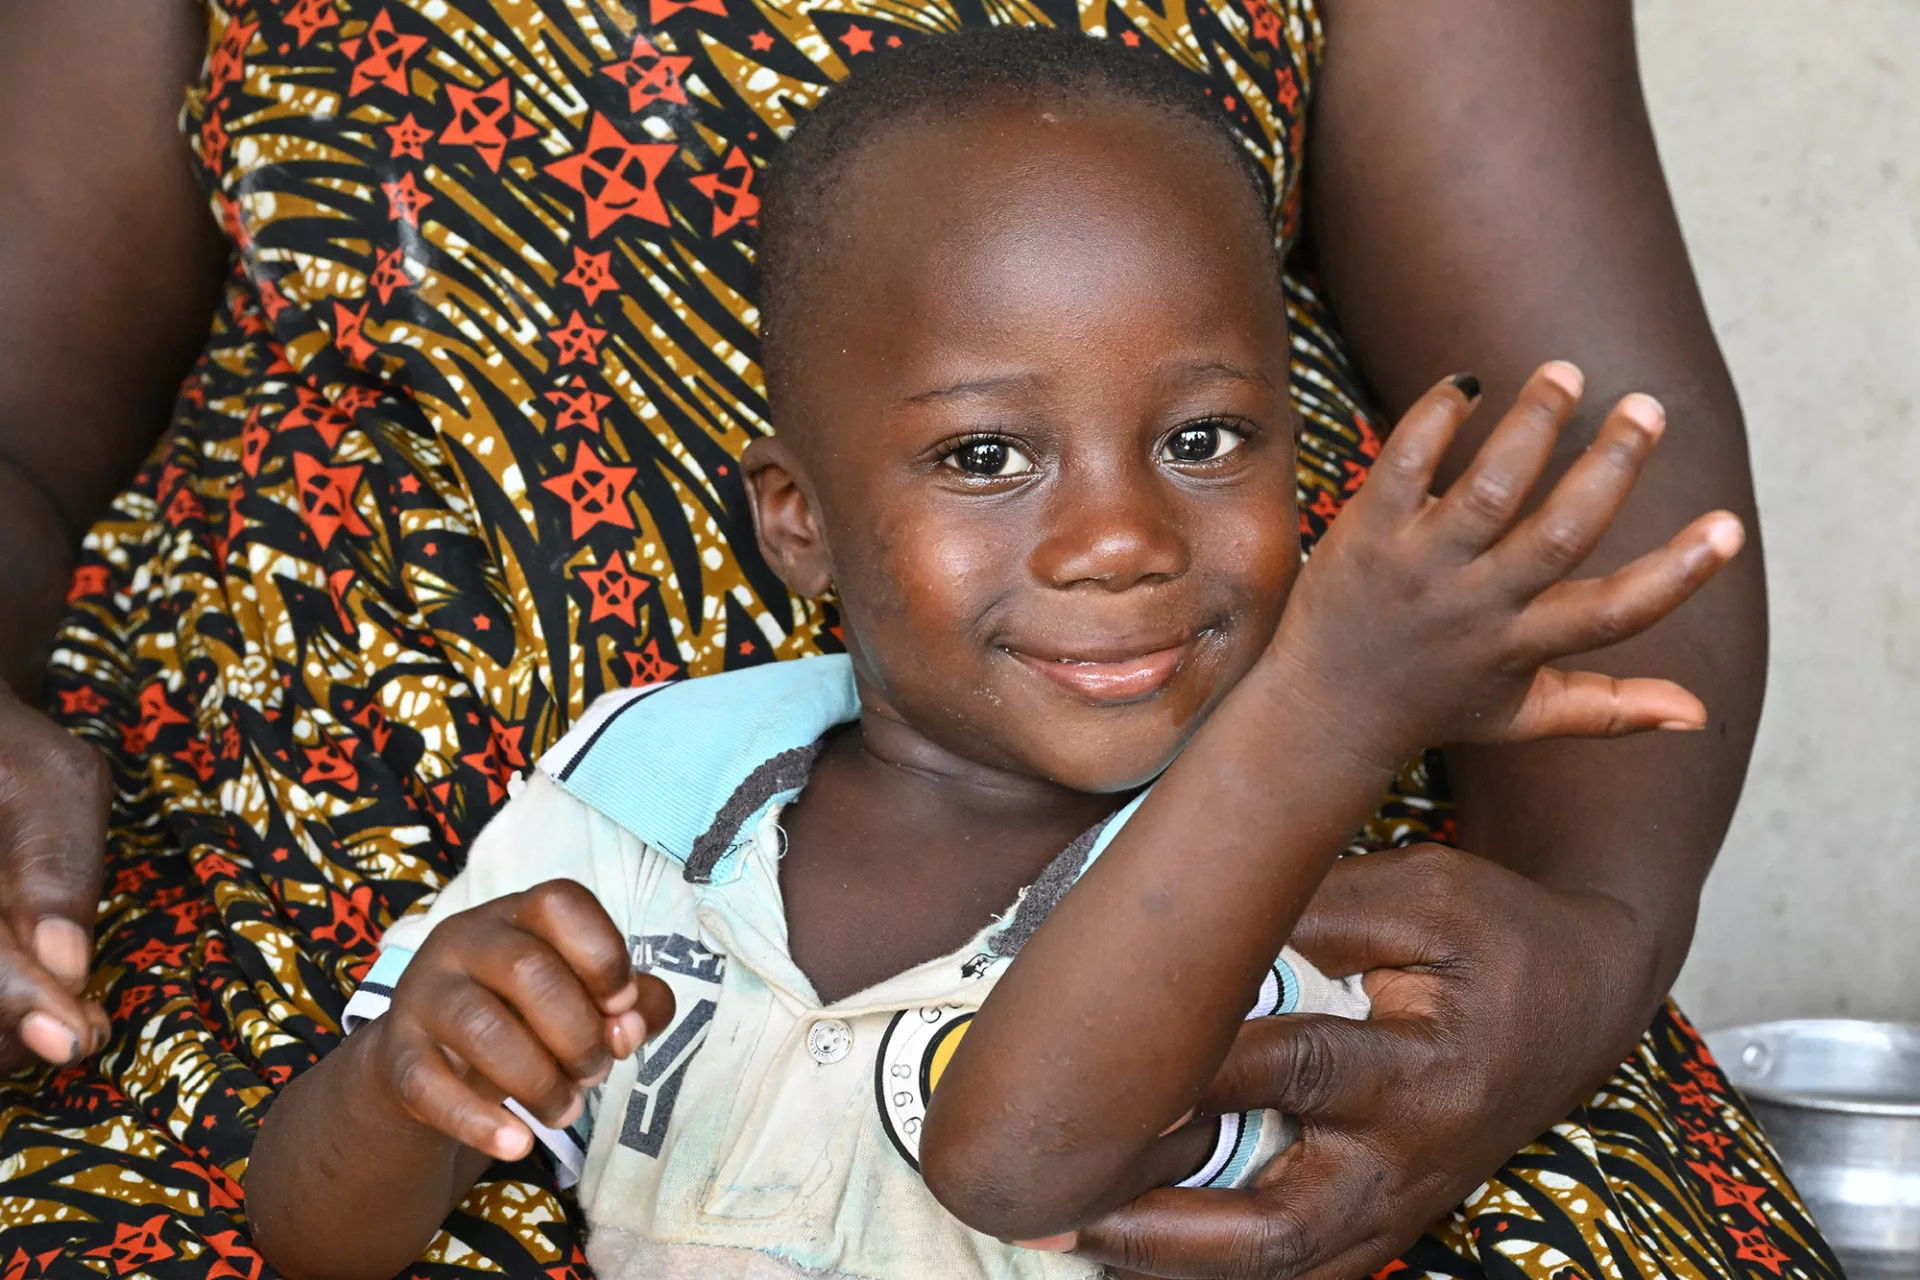 A 3 year old boy received a vitamin A supplement in a village in Côte d'Ivoire